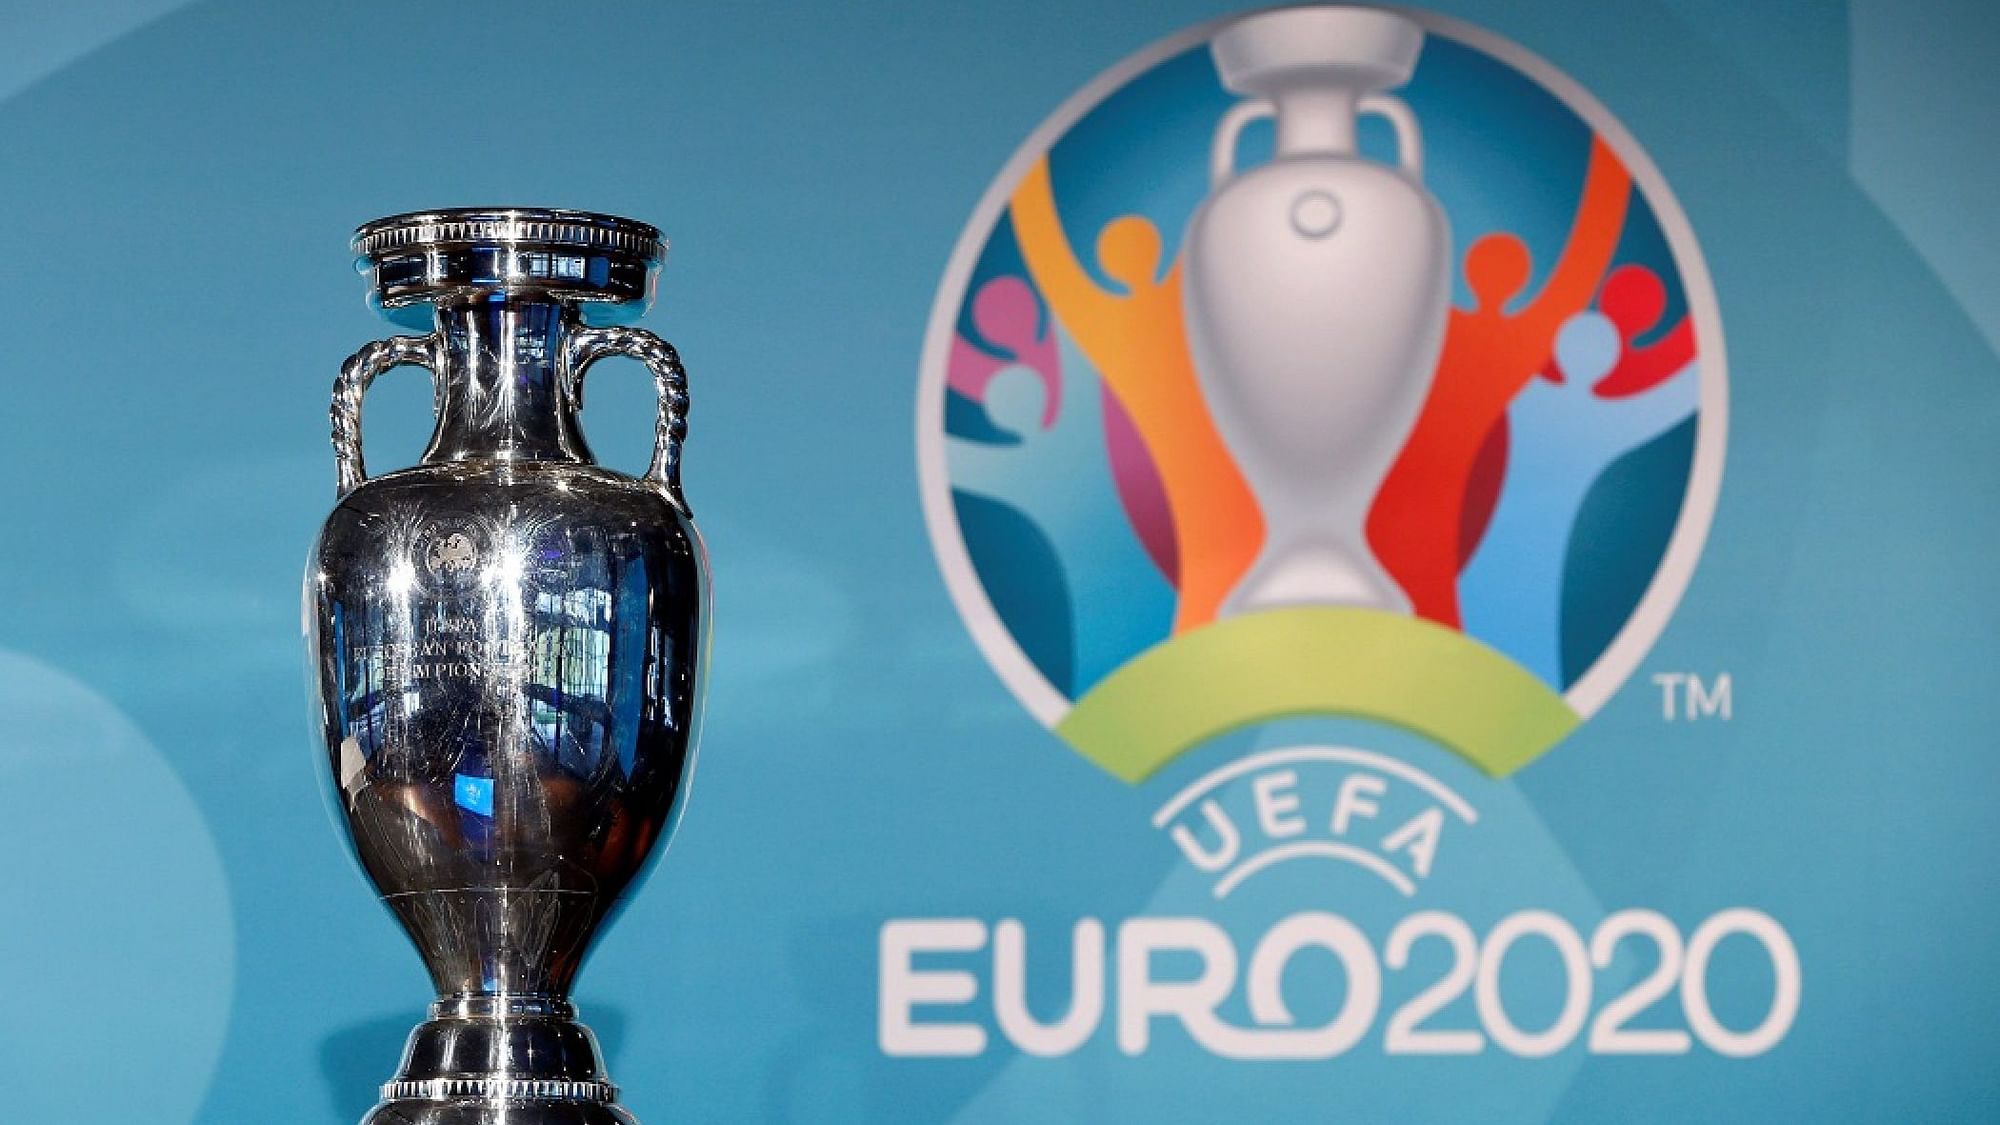 Champions League Could be Curtailed, Euro 2020 Might Get Pos